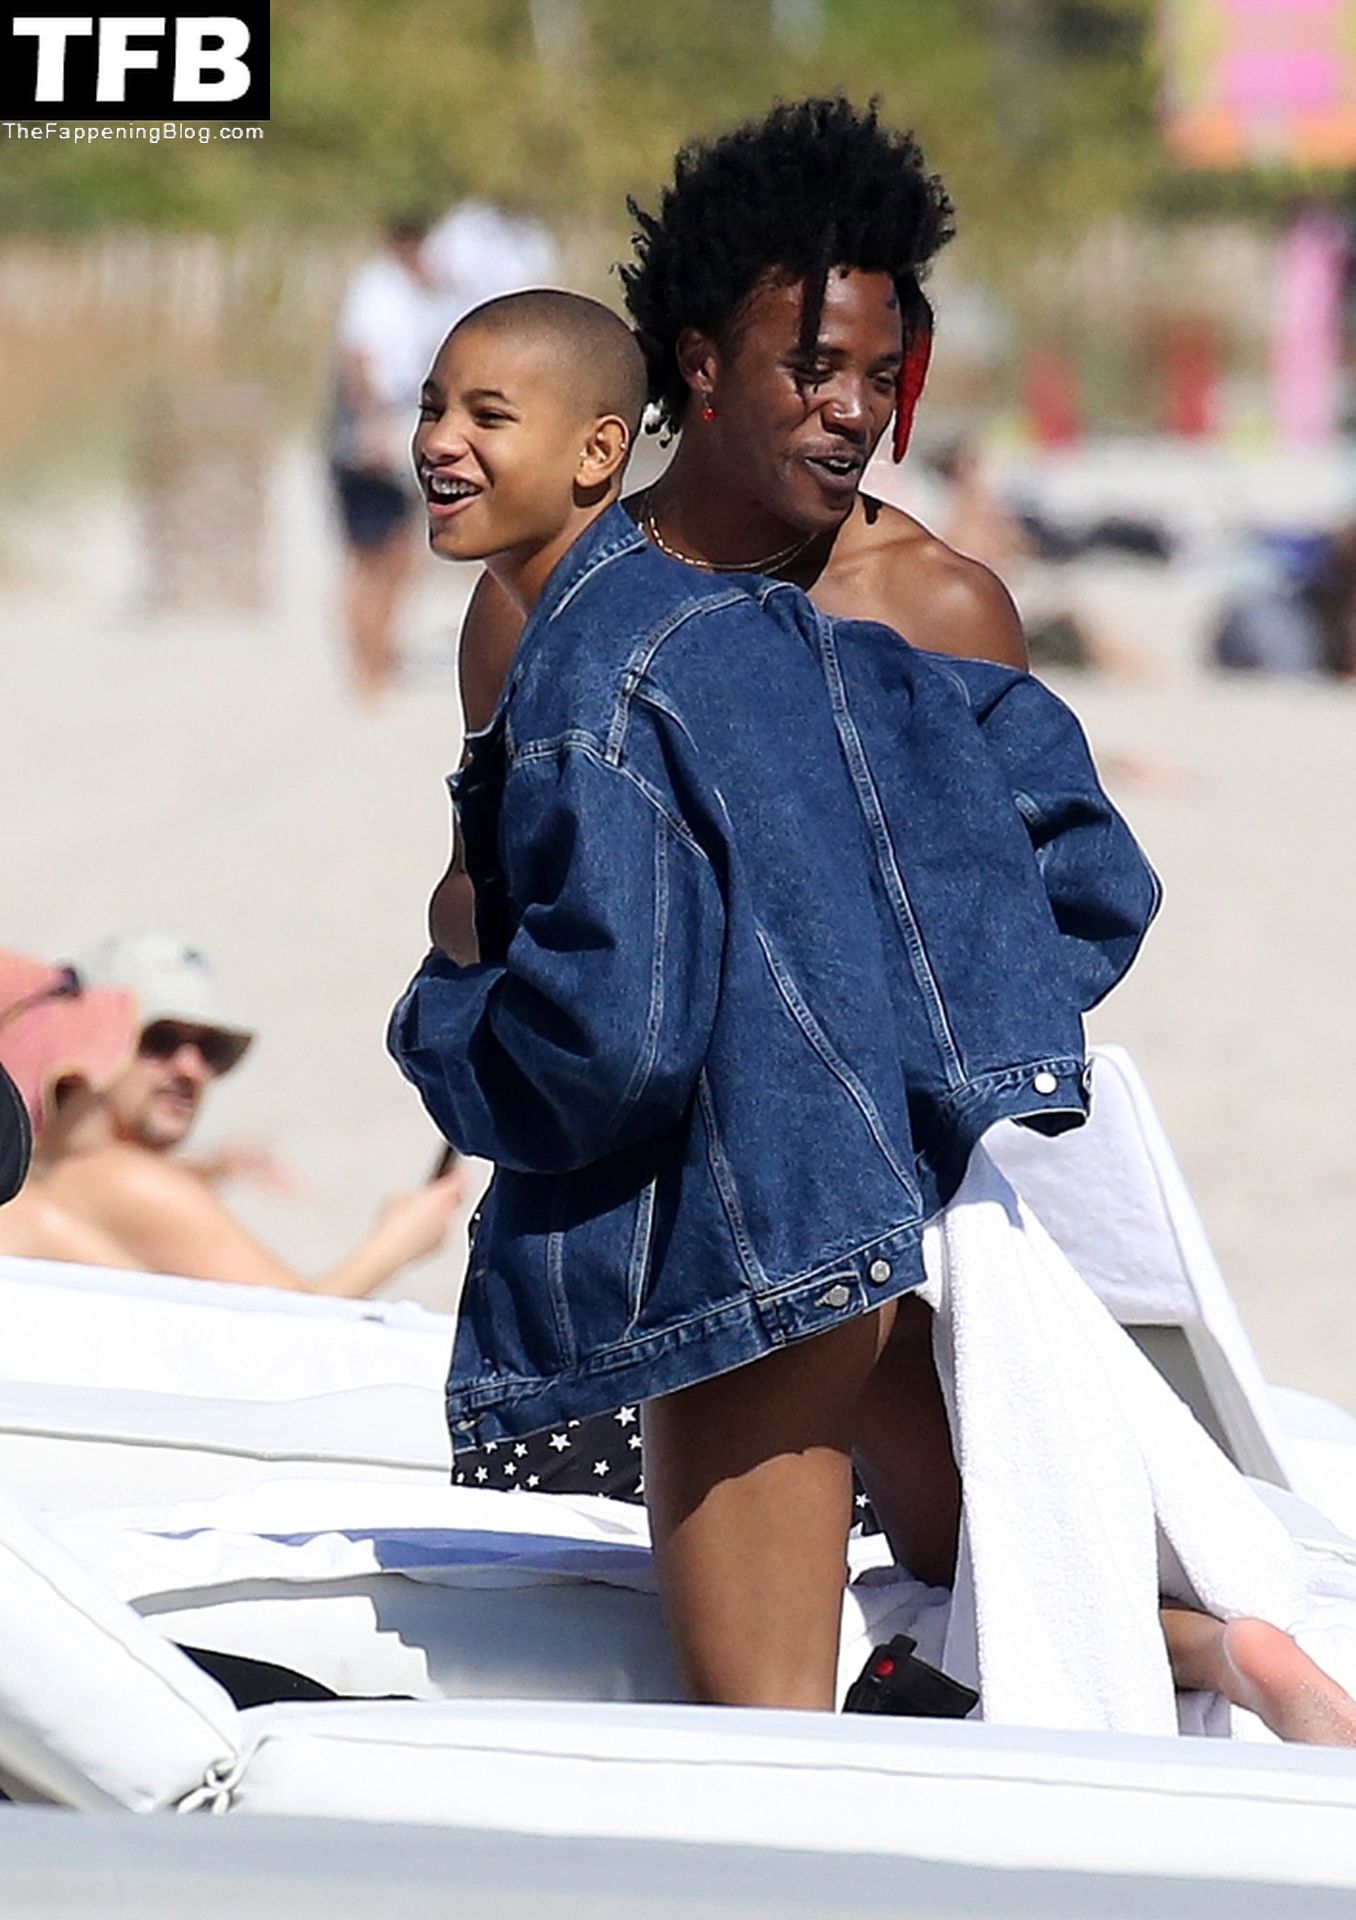 Willow-Smith-Sexy-The-Fappening-Blog-13.jpg